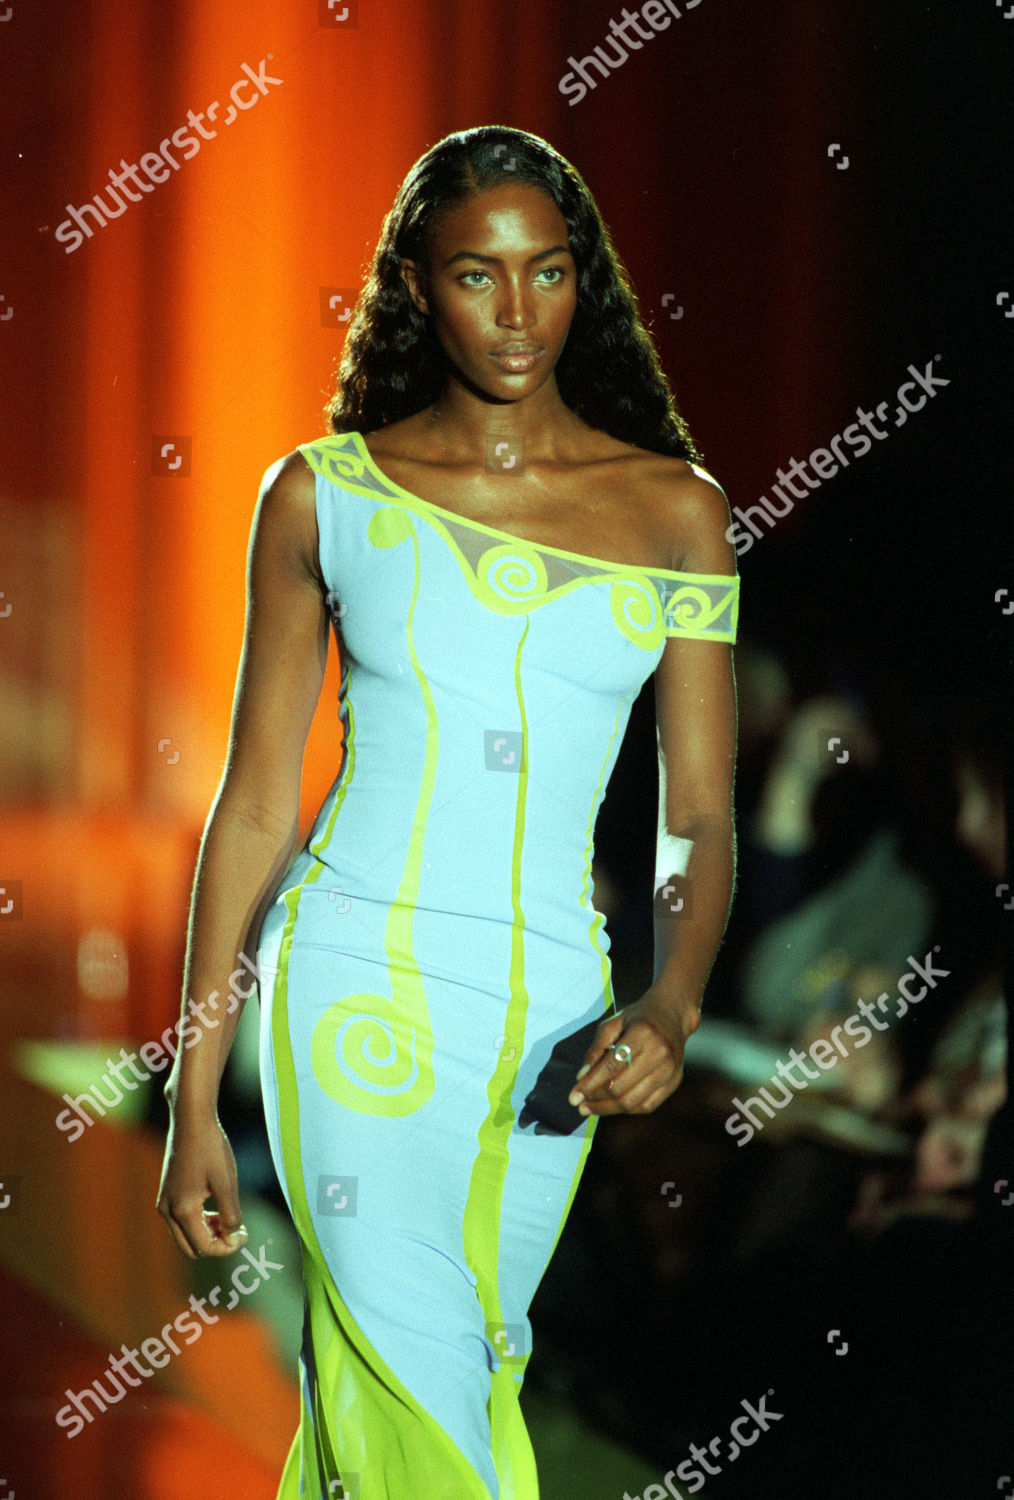 gianni versace collection